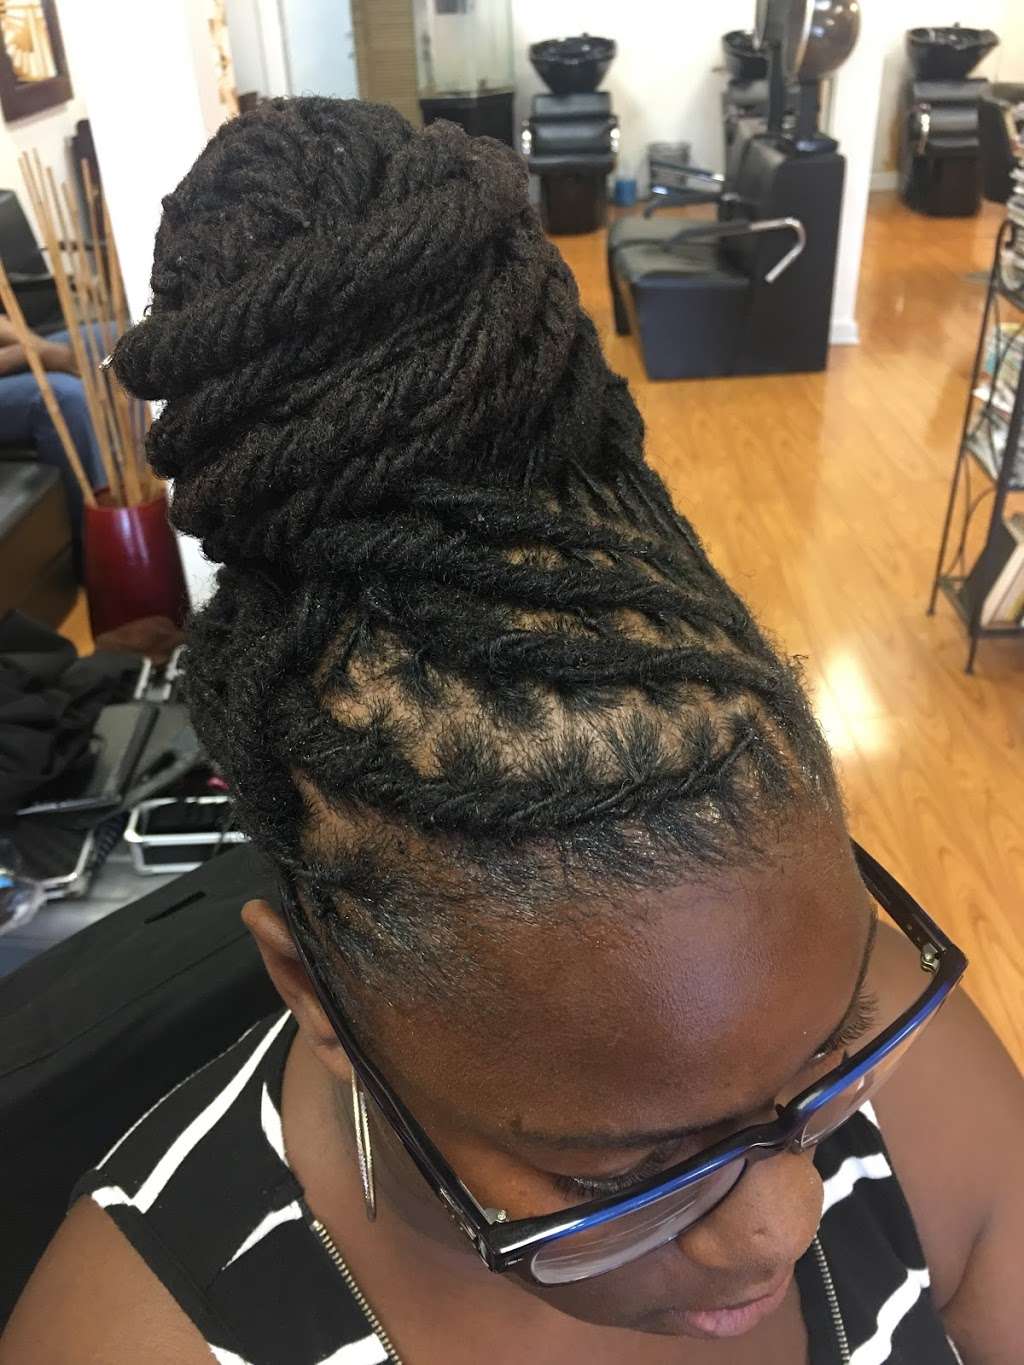 TWISTED ROOTS SALON | 701 E 75th St, Chicago, IL 60619 | Phone: (773) 994-9878